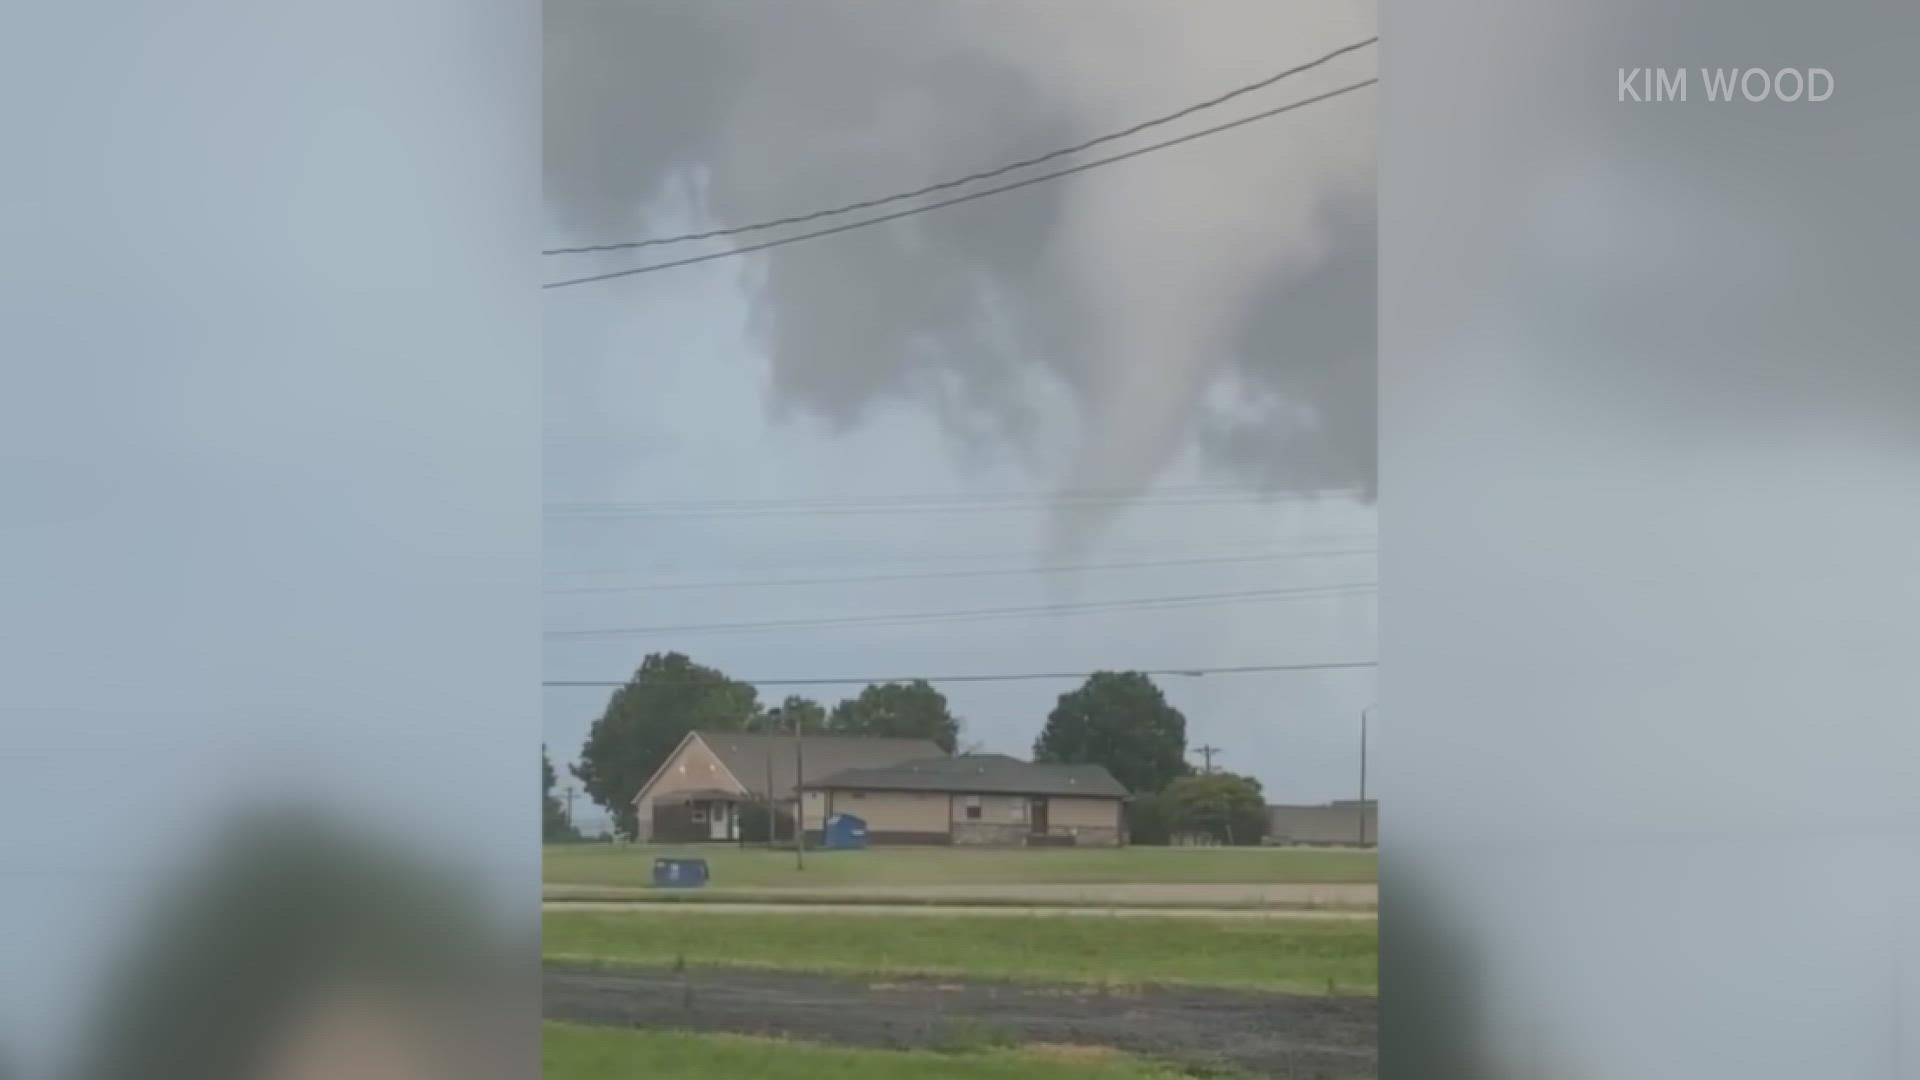 Video from Kim Wood in Bells appears to show a low-hanging funnel cloud over Highway 79.